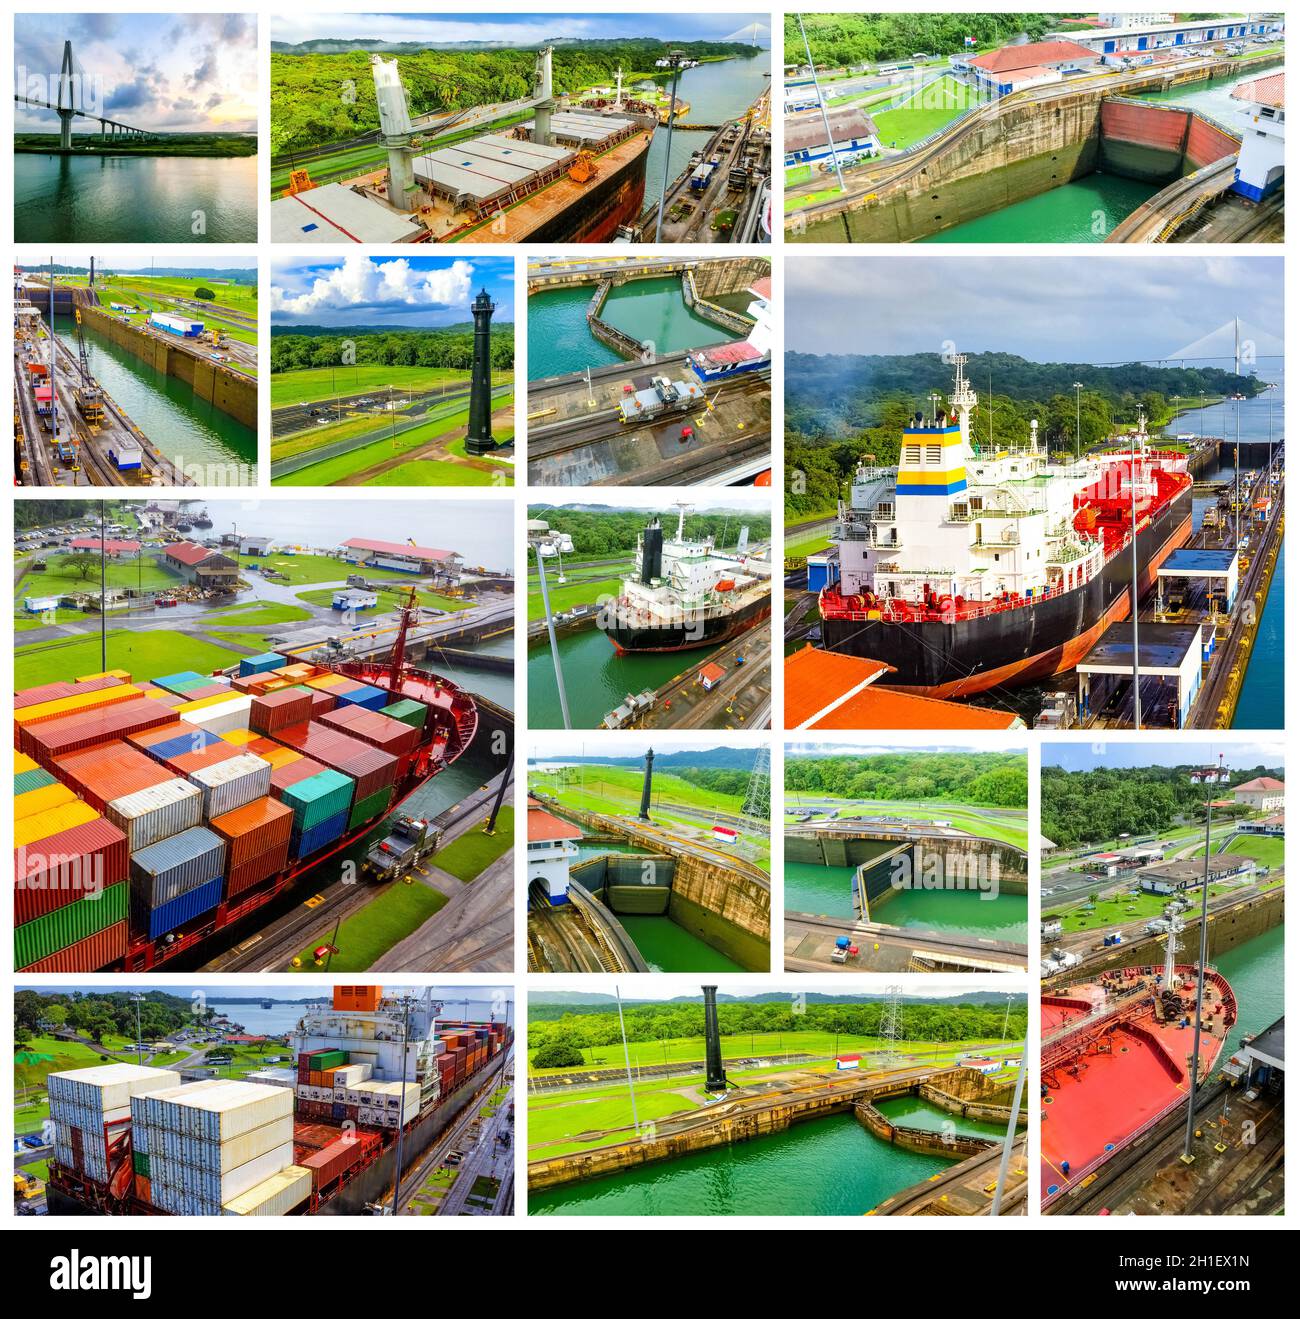 View of Panama Canal from cruise ship at Panama. Collage Stock Photo